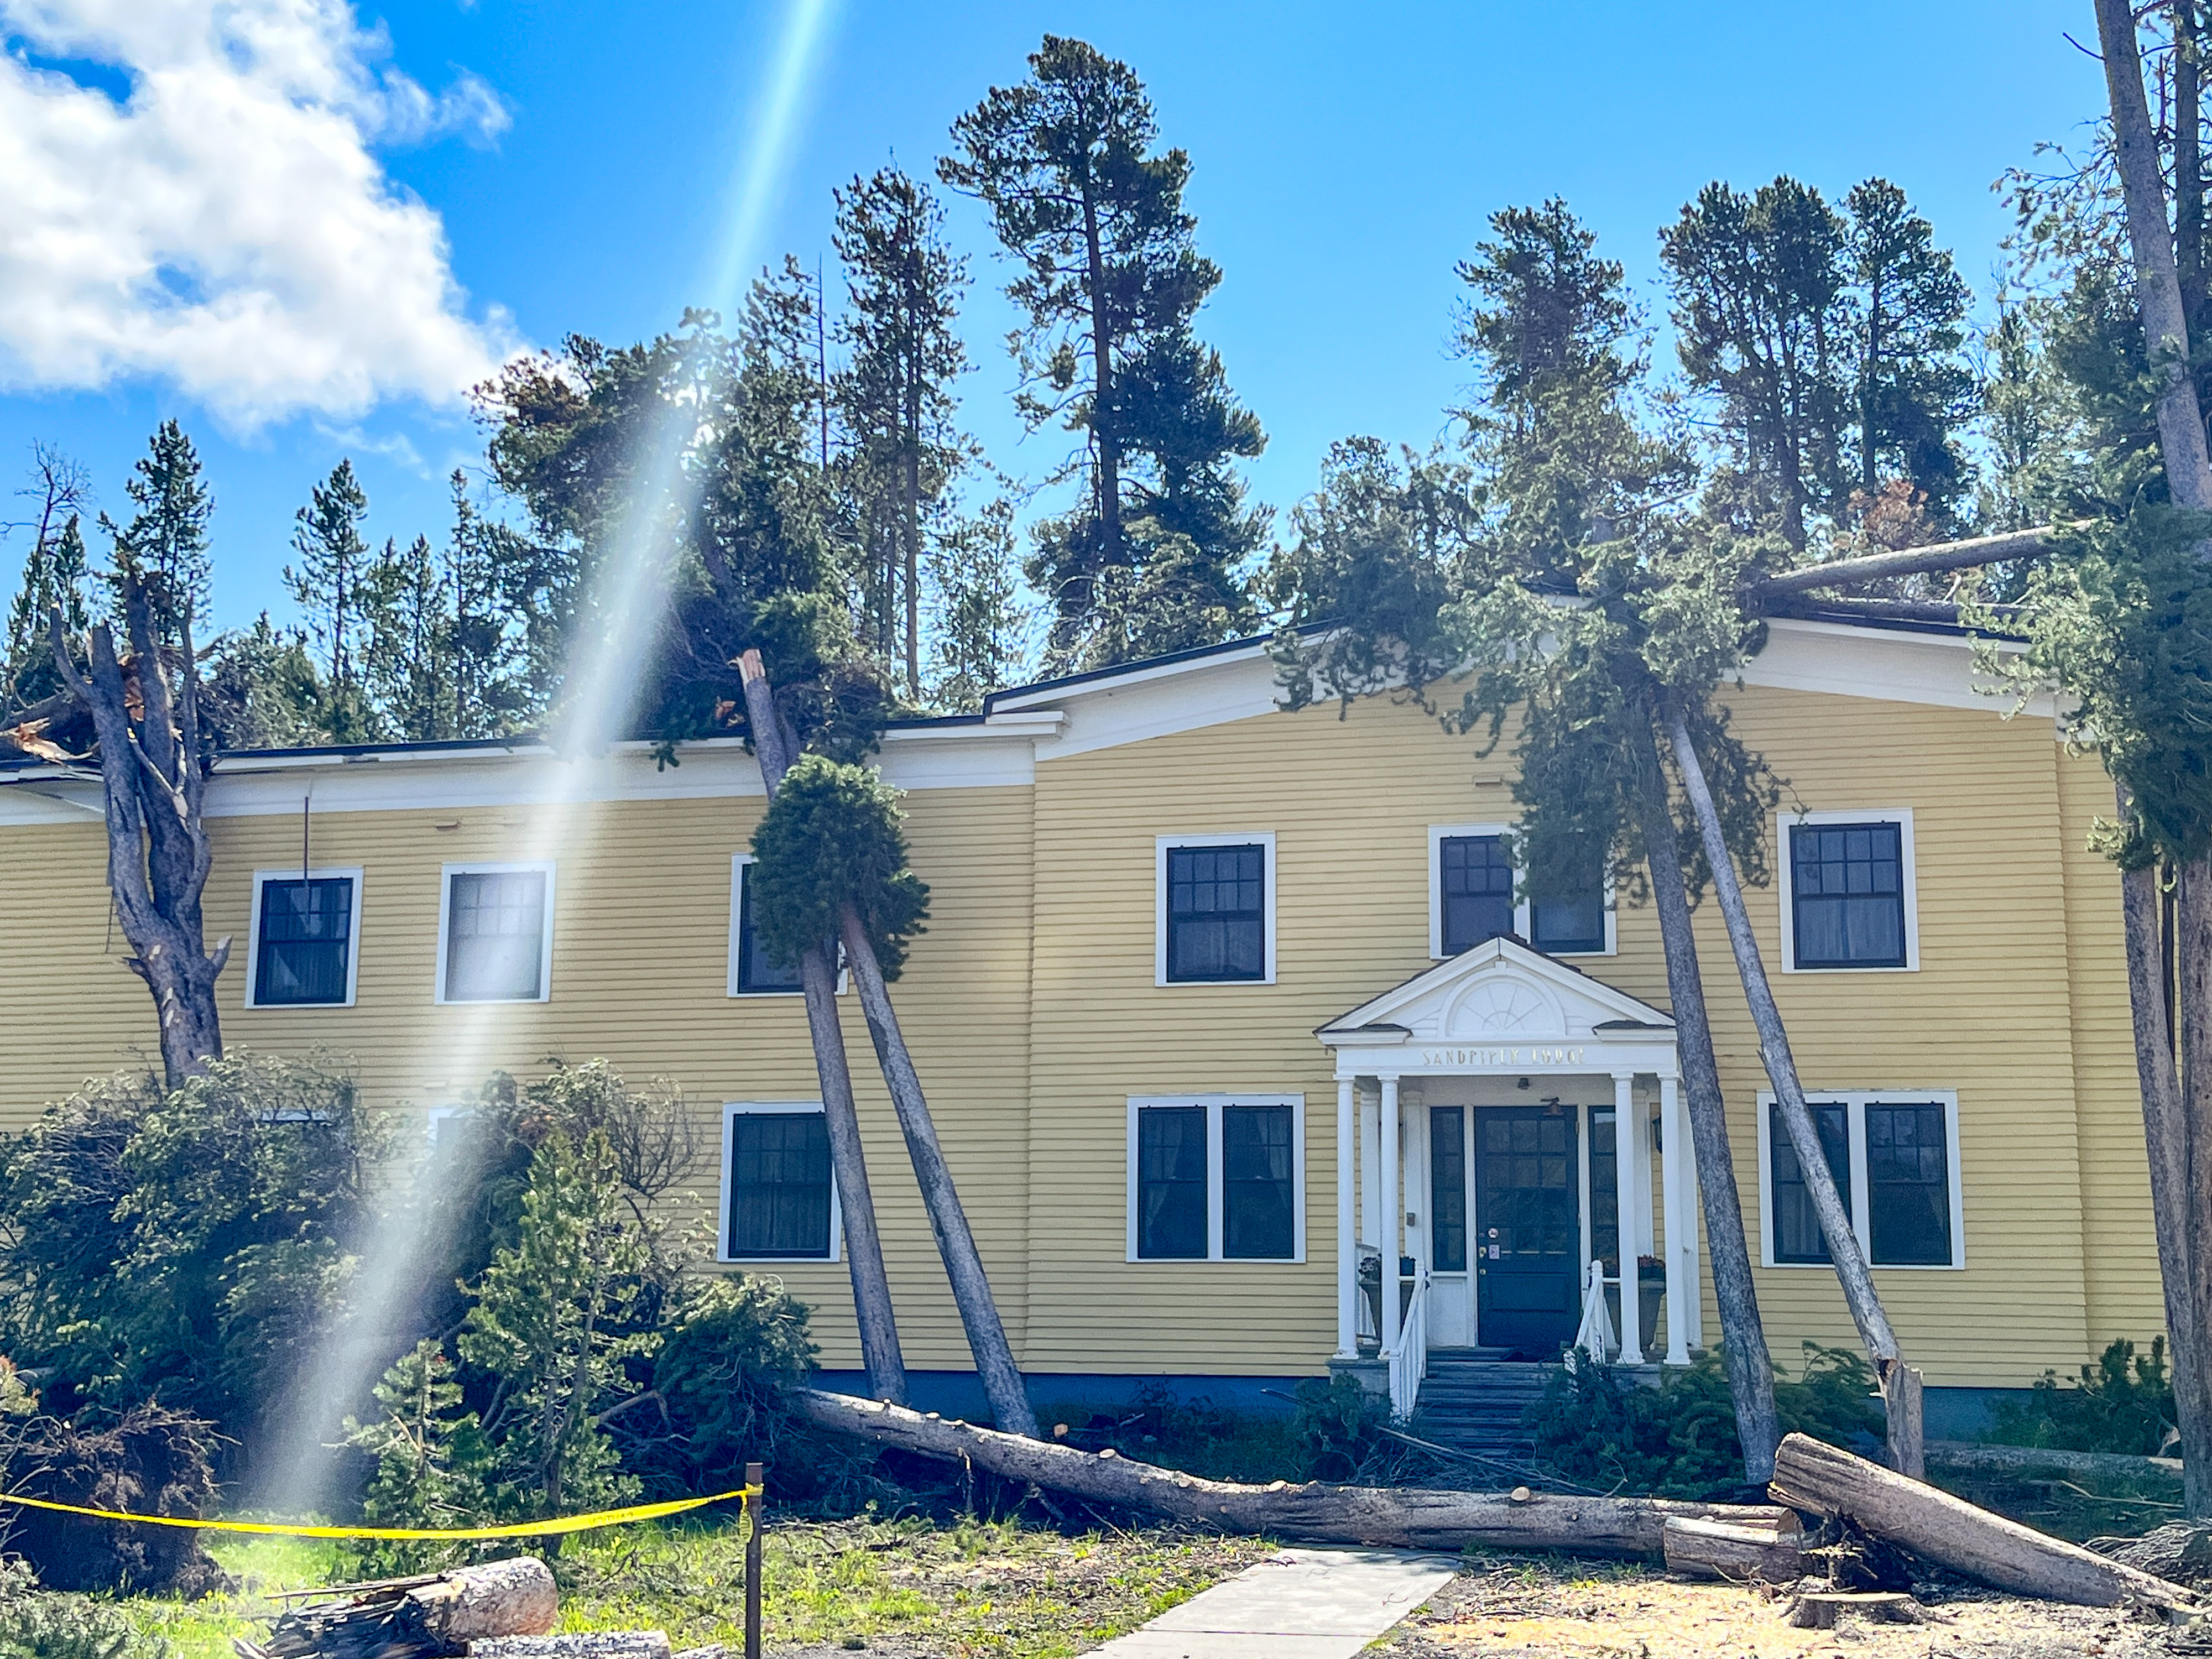 fallen trees near a yellow-colored building